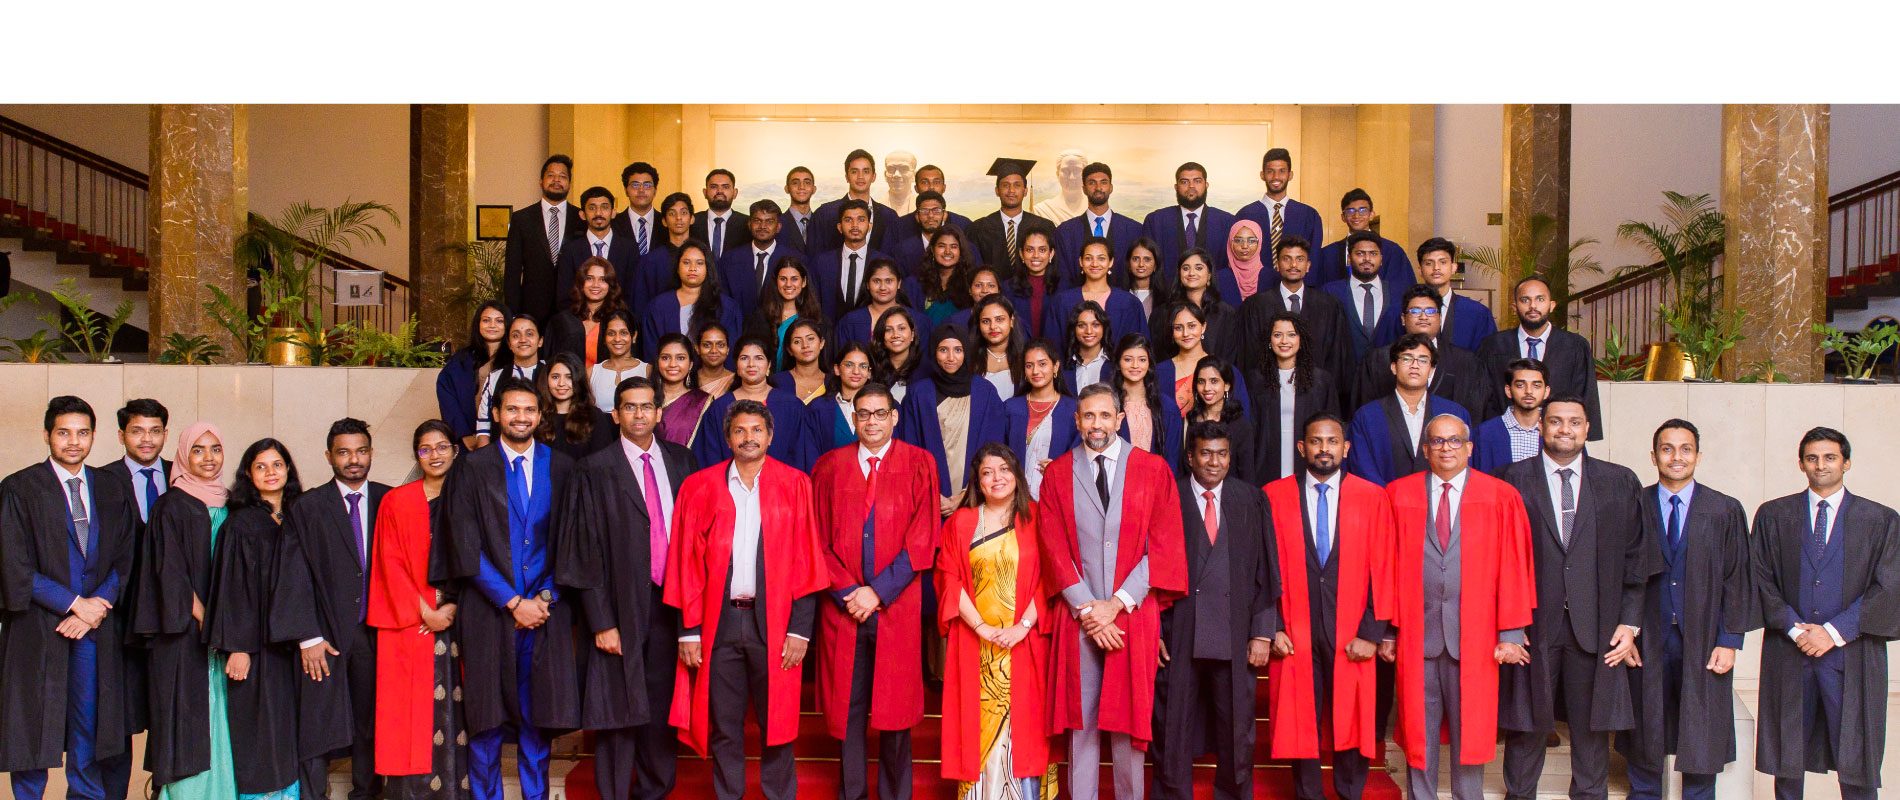 ACCA in Sri Lanka with the Most Qualified and Experienced Lecture Panel